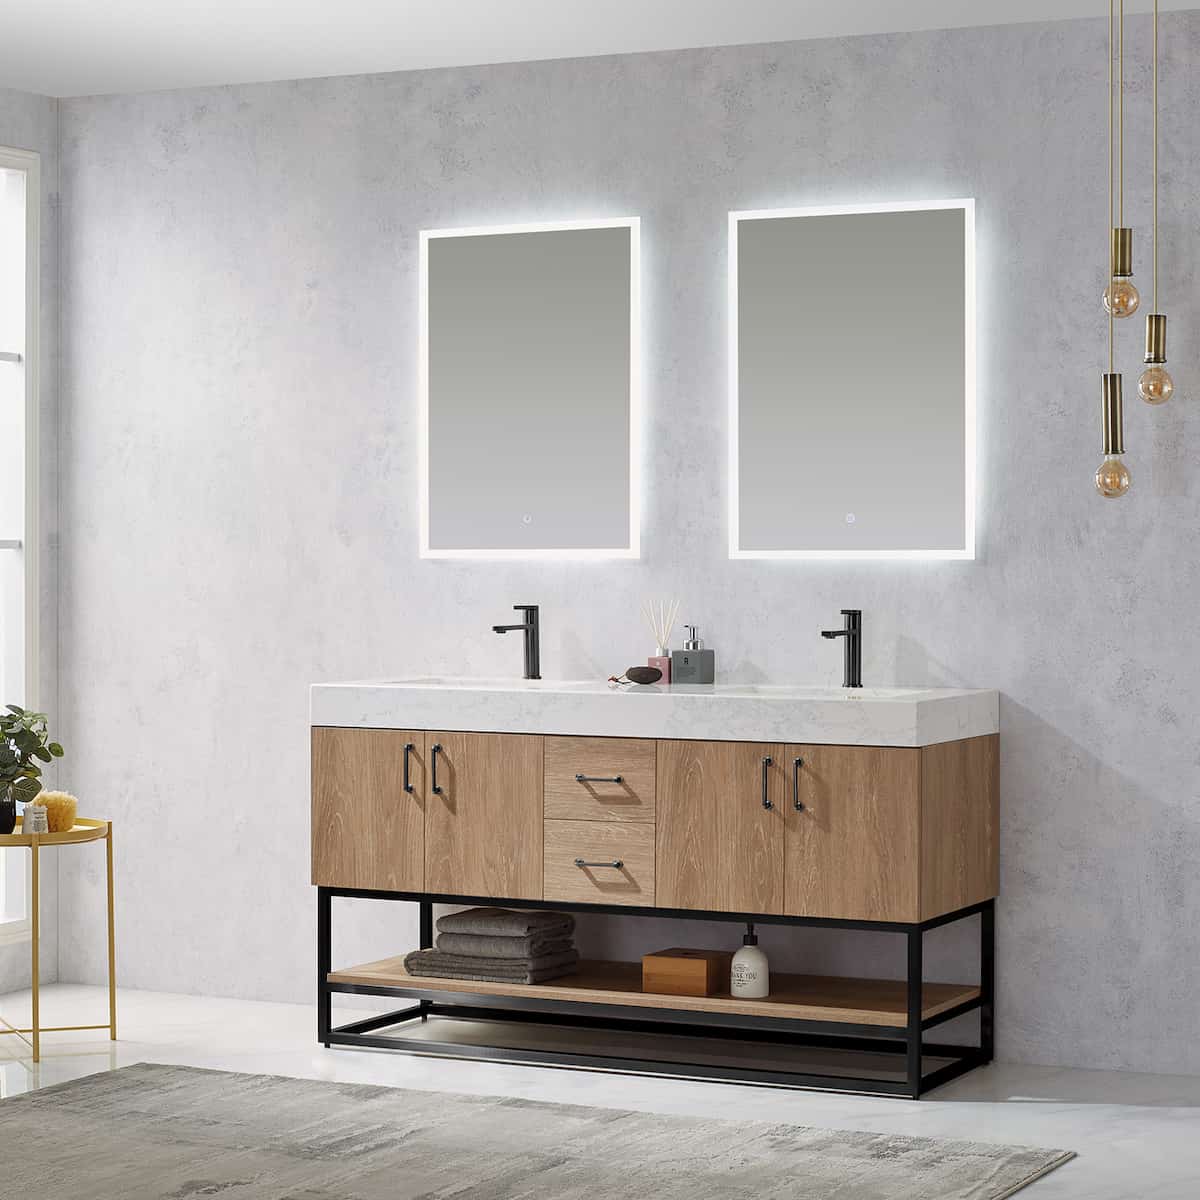 Vinnova Alistair 60 Inch Freestanding Double Vanity in North American Oak and Matte Black Frame with White Grain Stone Countertop With Mirrors Side 789060B-NO-GW